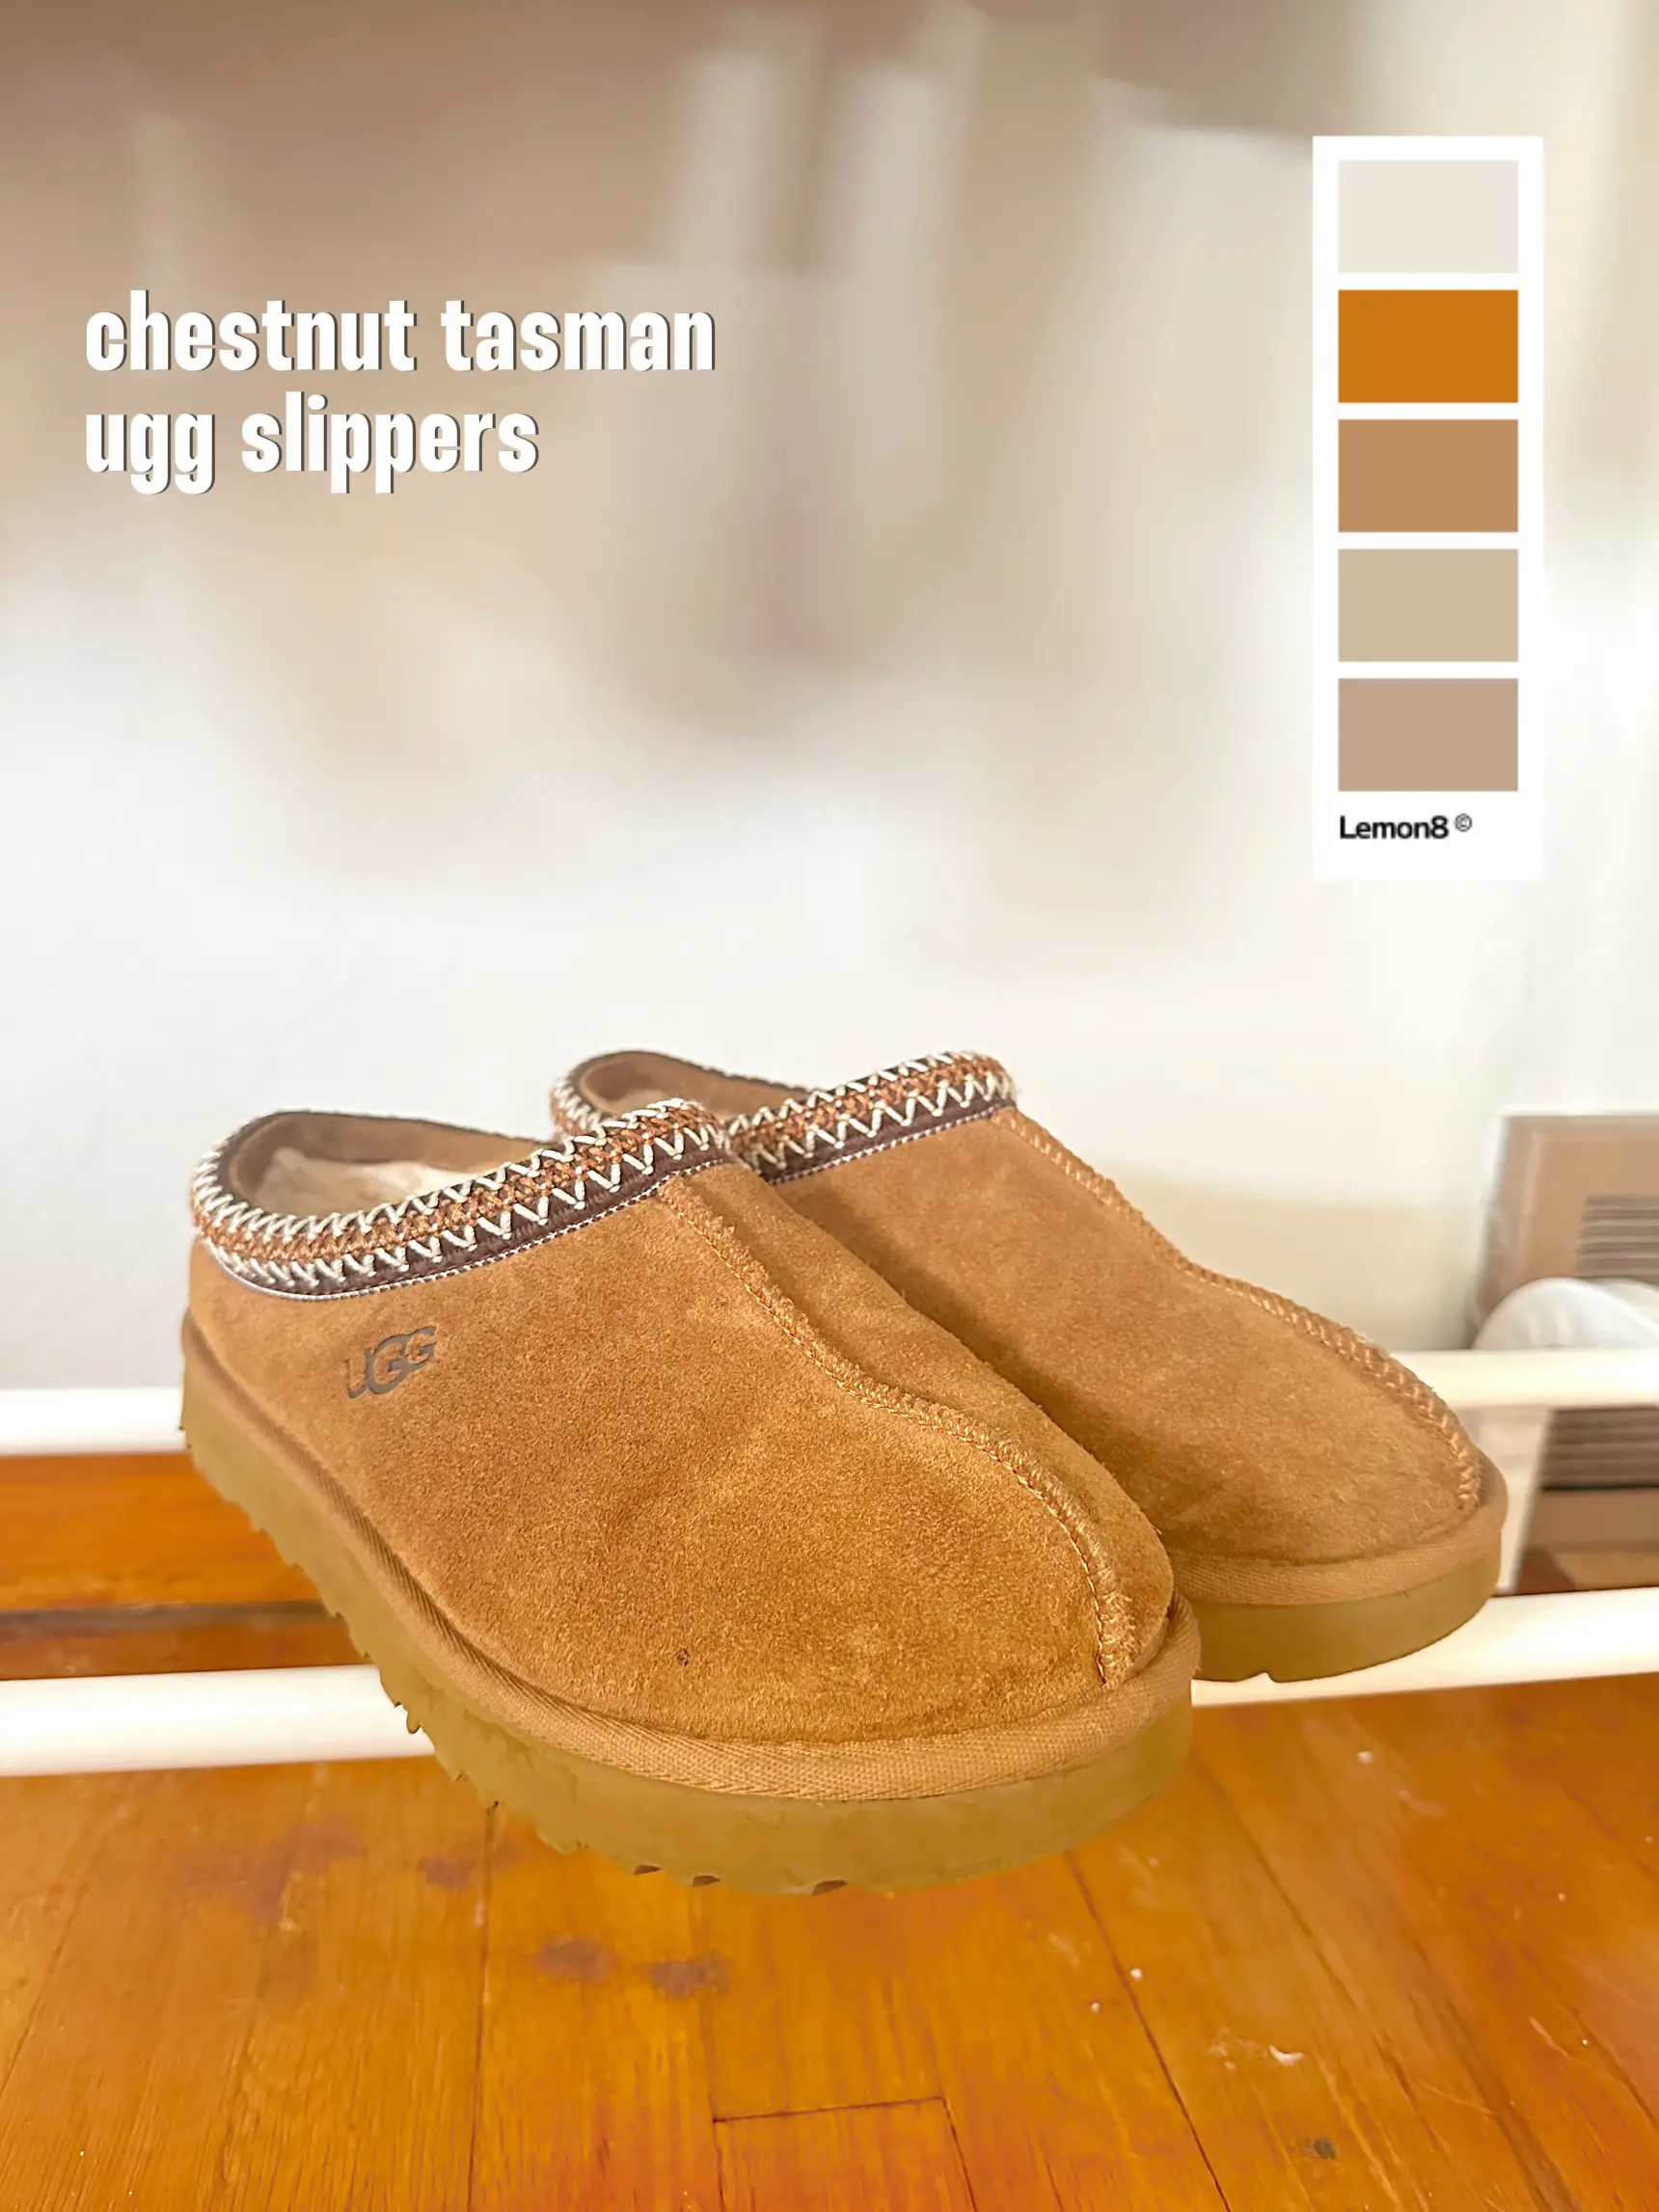 How to style your Ugg tasmen, Gallery posted by Sophia🎀🩰🩷